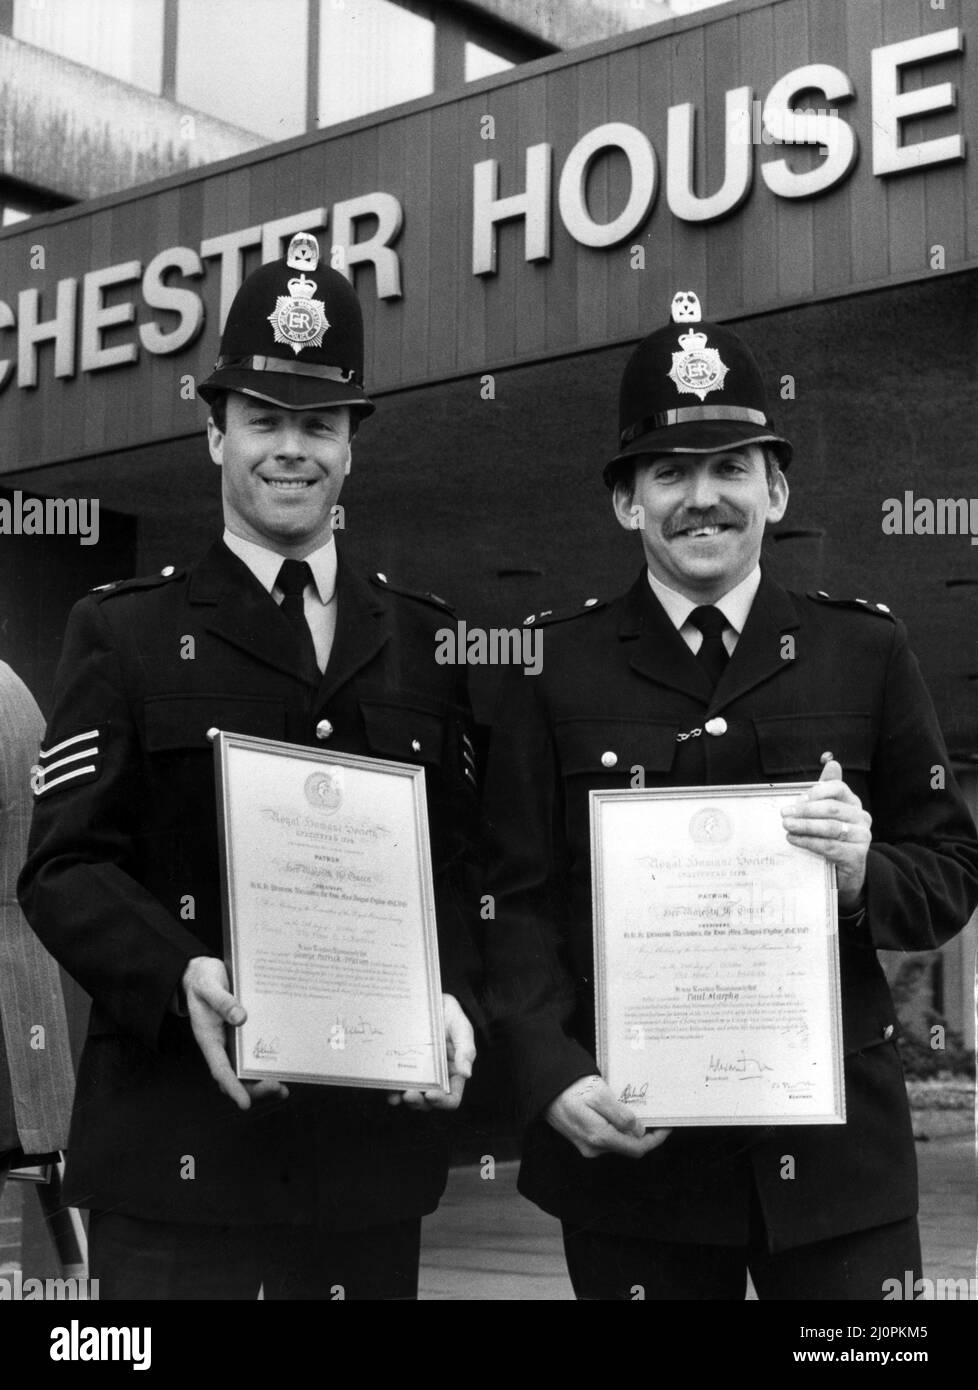 Two Manchester policemen stoned by rioting pickets as they fought to save a miner's life have earned a top award. Dramatic pictures of Sgt George Watson (left) and Pc Paul Murphy made front page news last June at the height of the Mineworkers' Union Dispute, as they helped one man who was injured outside the Orgreave coking plant in South Yorkshire. 17th May 1984. Stock Photo